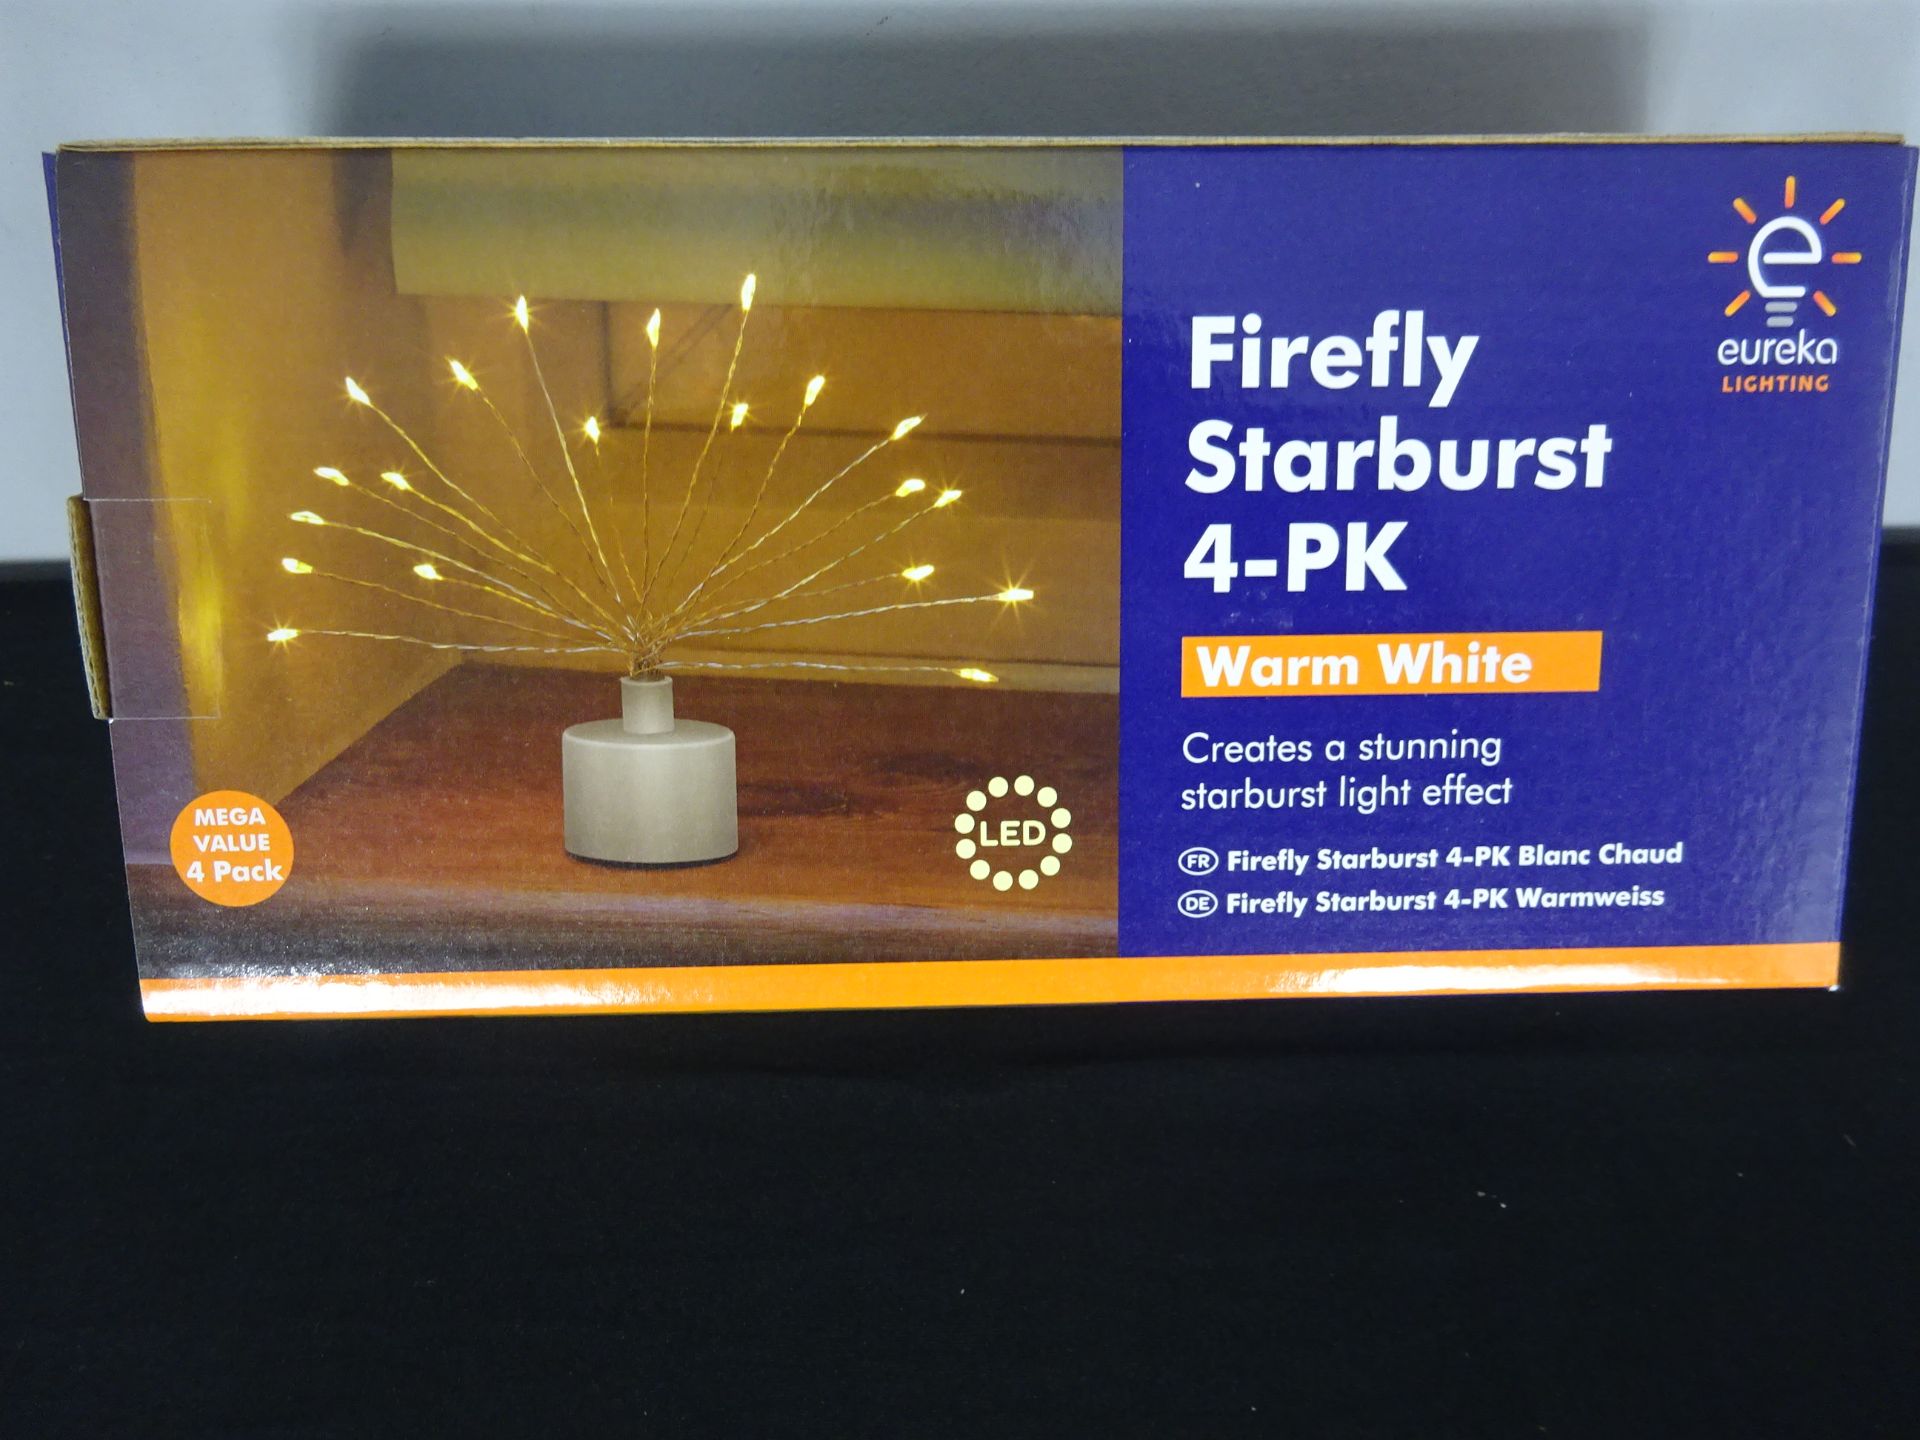 New 4 Pack Of Warm White FireFly Starburst LED Lights With Batteries - Image 3 of 3